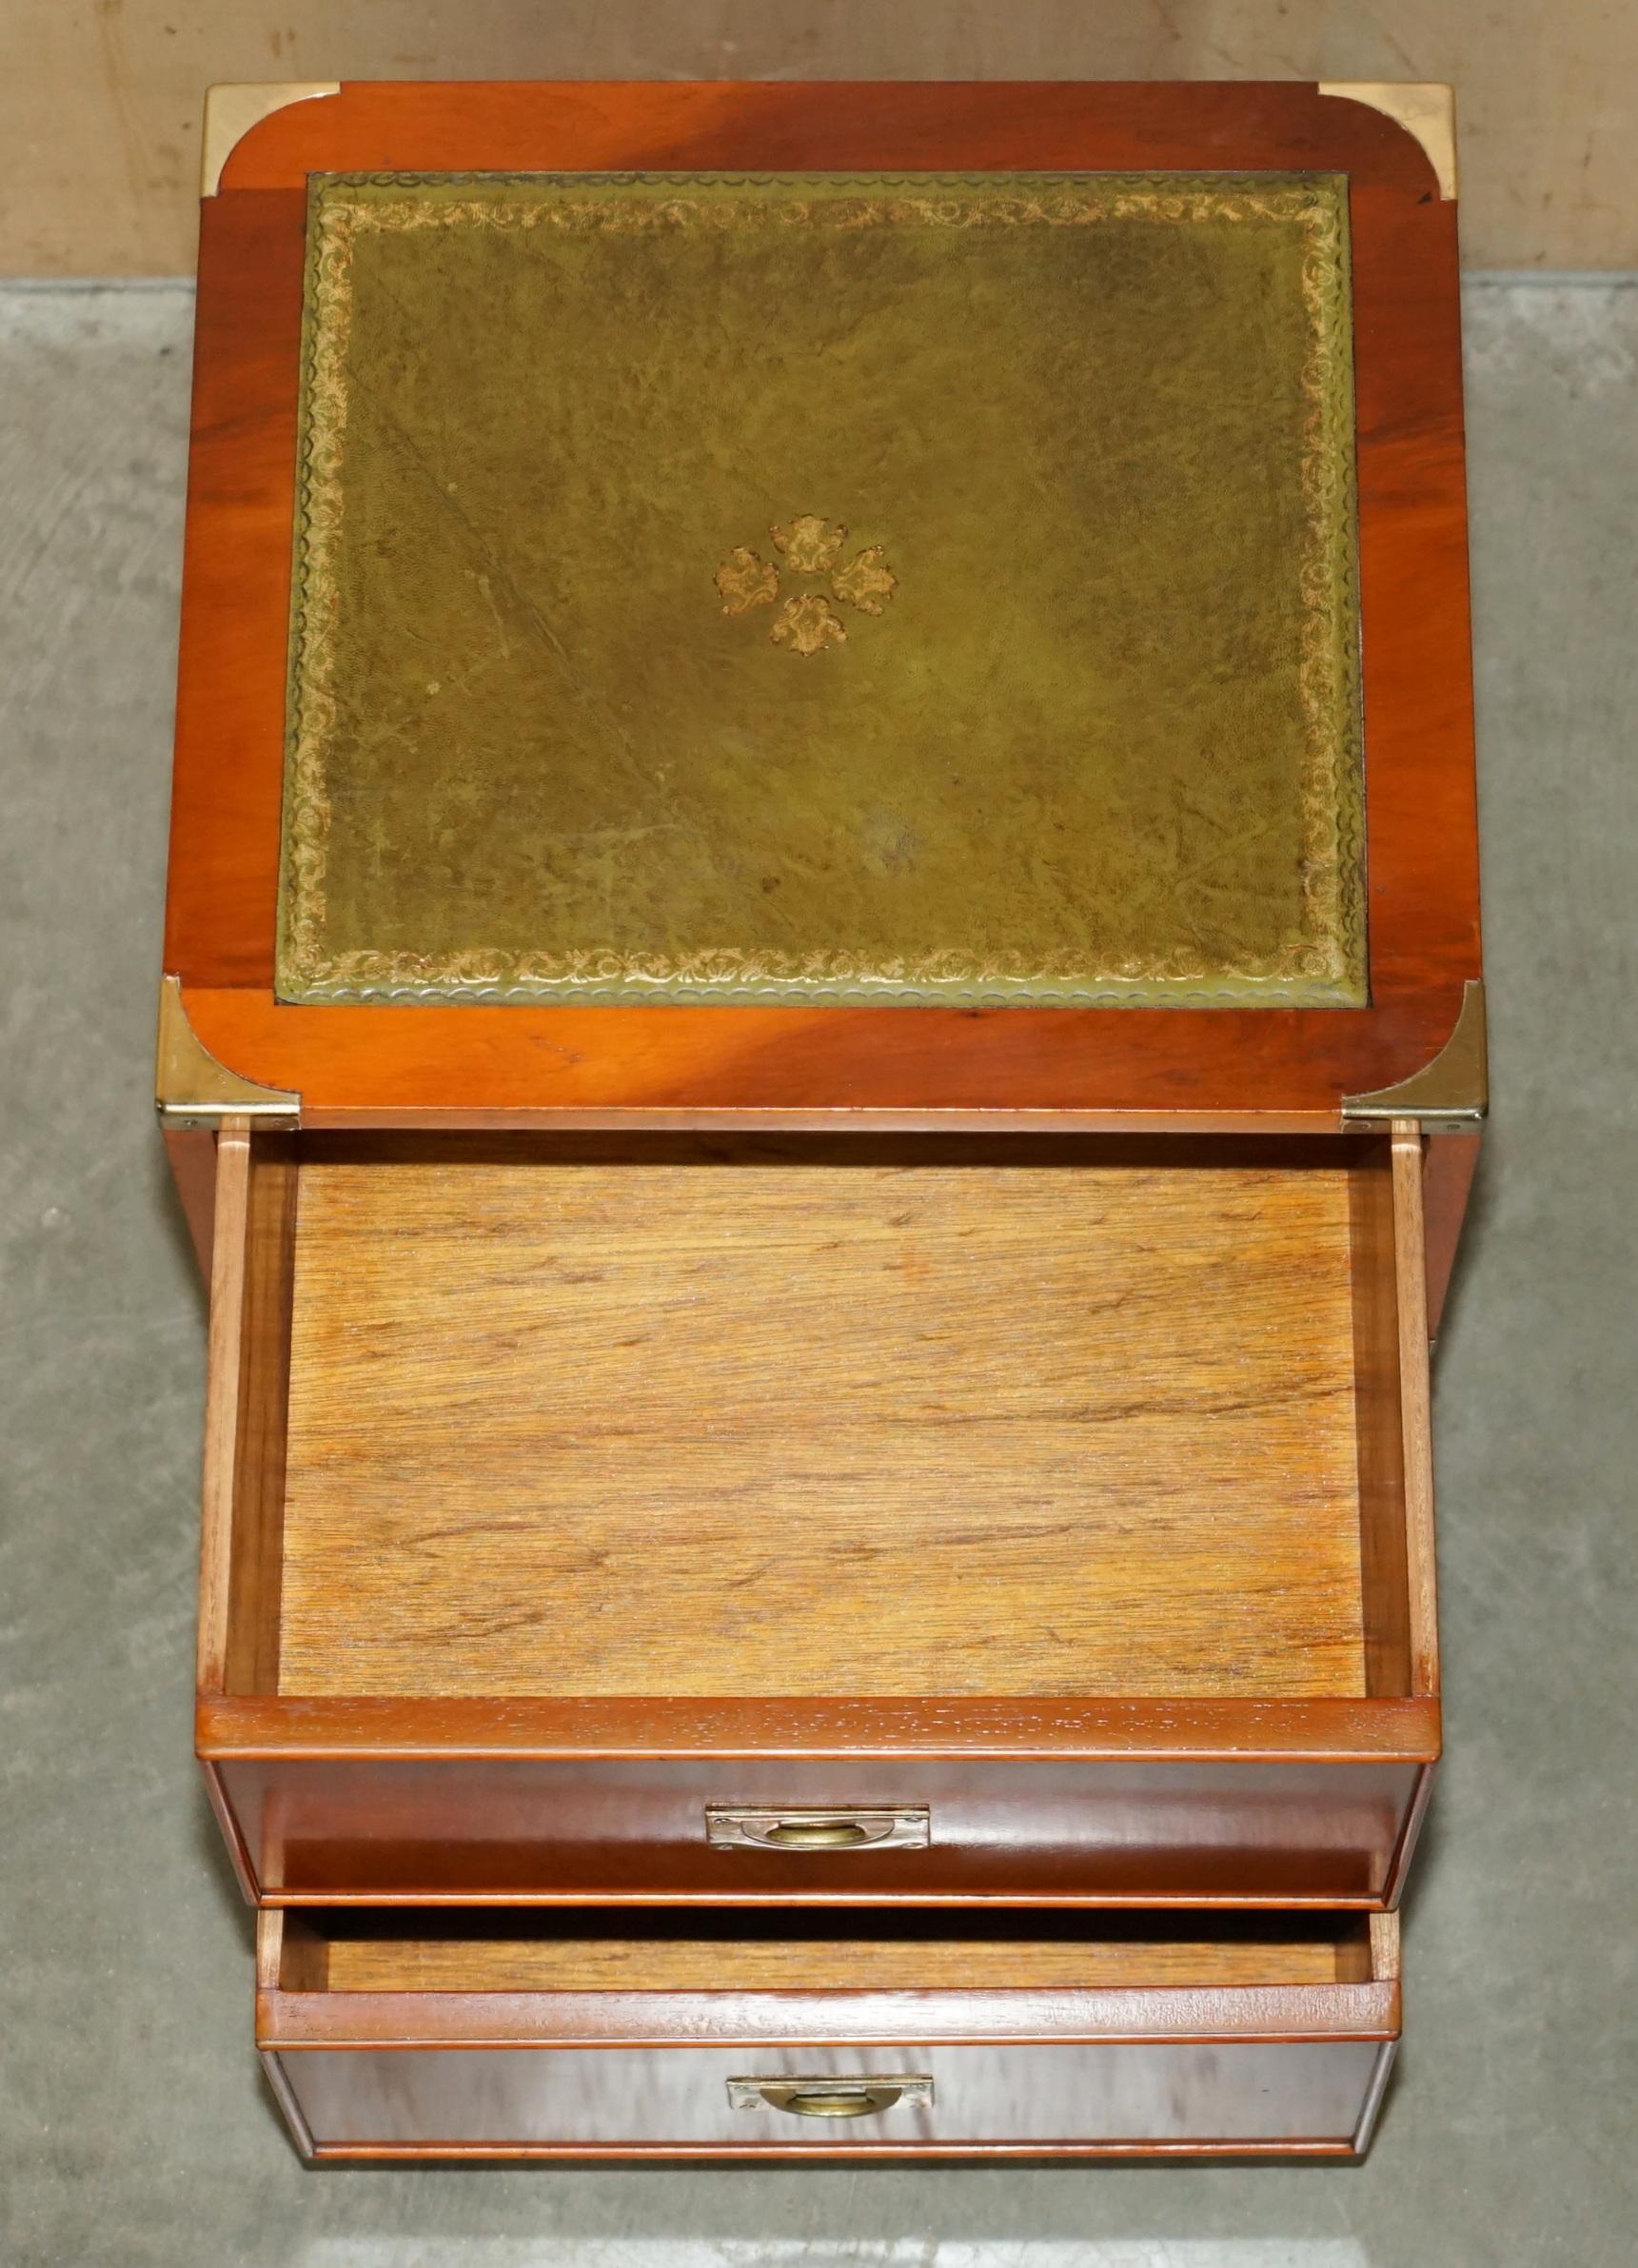 LOVELY PAiR OF BURR YEW WOOD GREEN LEATHER MILITARY CAMPAIGN NIGHTSTAND DRAWERS im Angebot 11